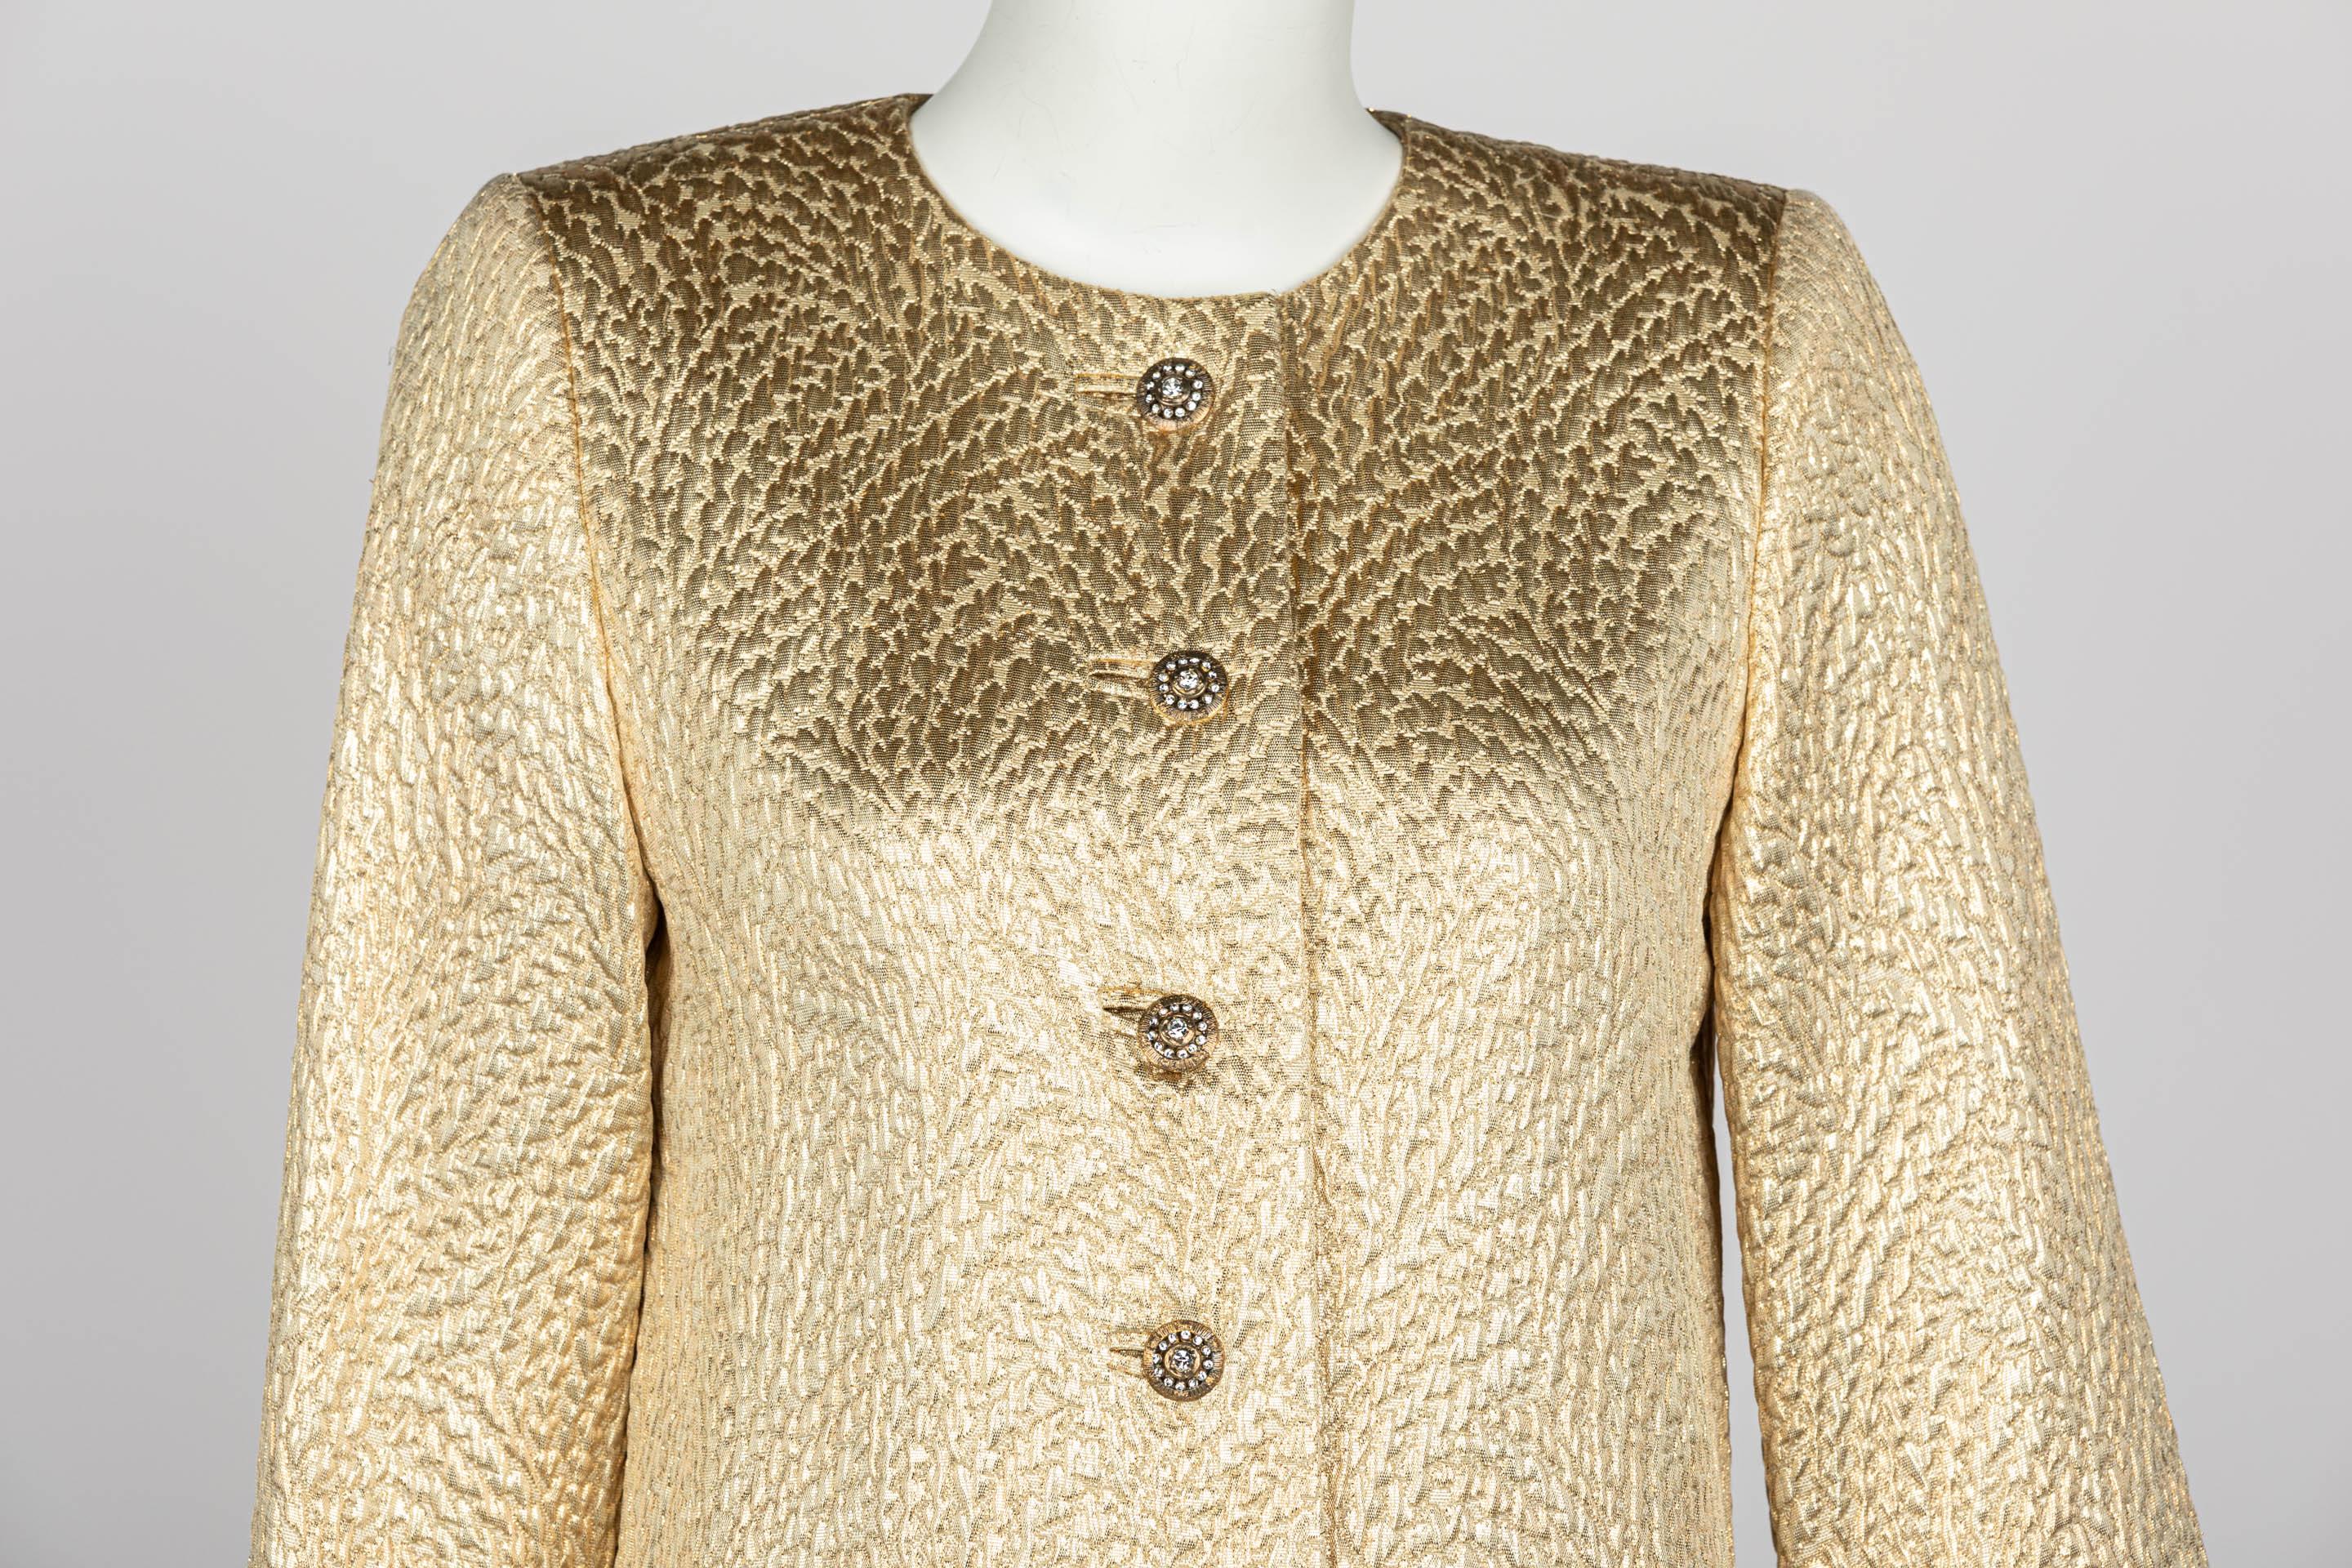 Yves Saint Laurent Gold Evening Coat w/ Jeweled Buttons YSL, 1990s For Sale 2